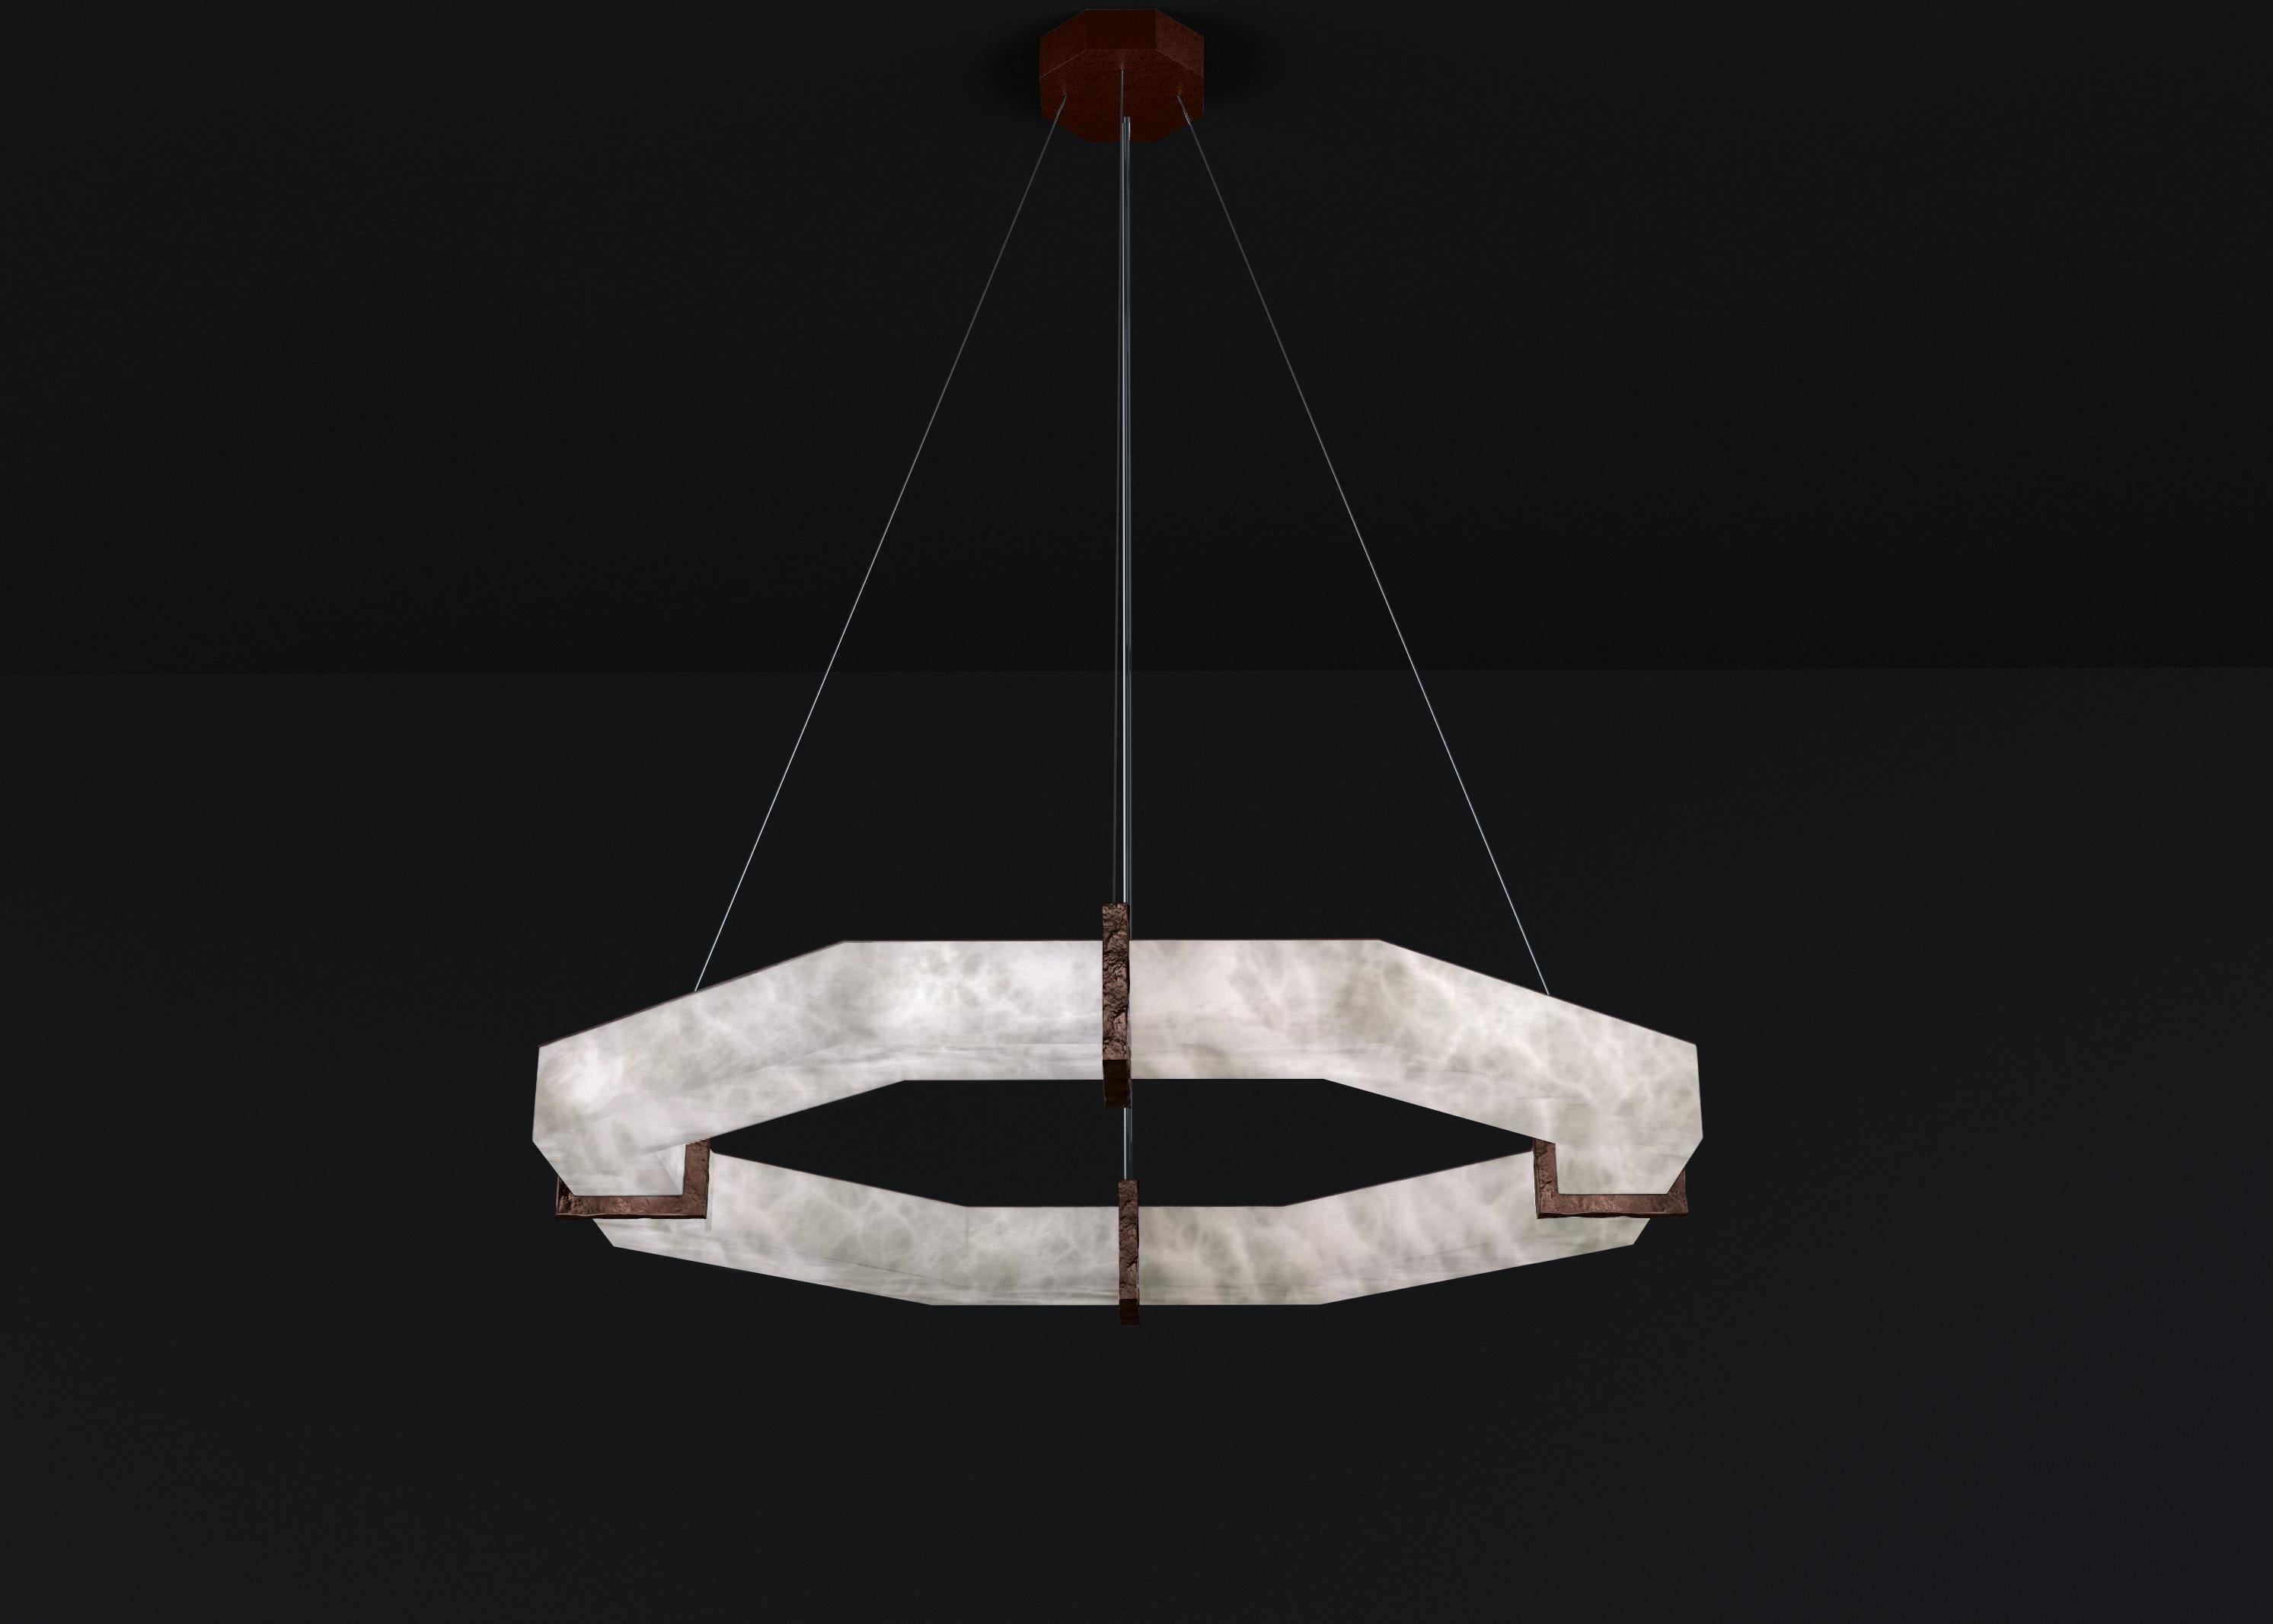 Efesto Ruggine Of Florence Metal Pendant Lamp by Alabastro Italiano
Dimensions: D 83 x W 80 x H 11 cm.
Materials: White alabaster and metal.

Available in different finishes: Shiny Silver, Bronze, Brushed Brass, Ruggine of Florence, Brushed